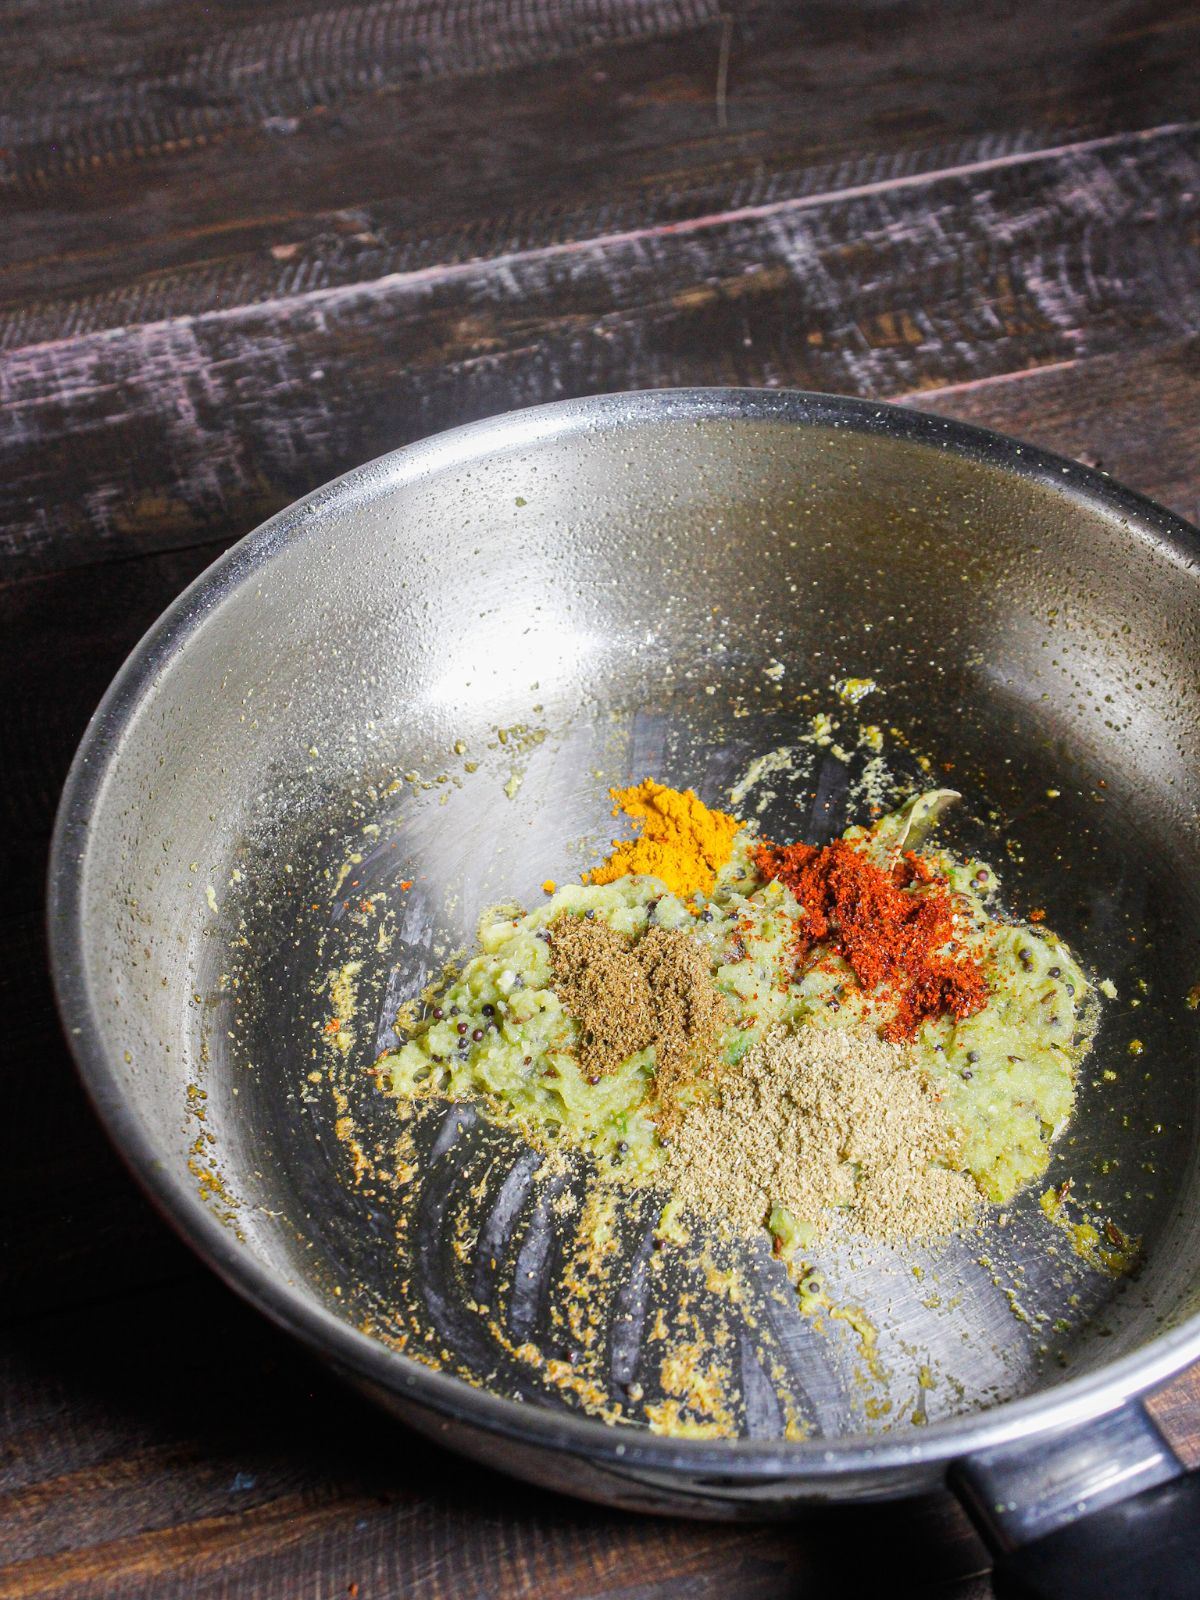 Add all the powdered spices to the pan and saute 